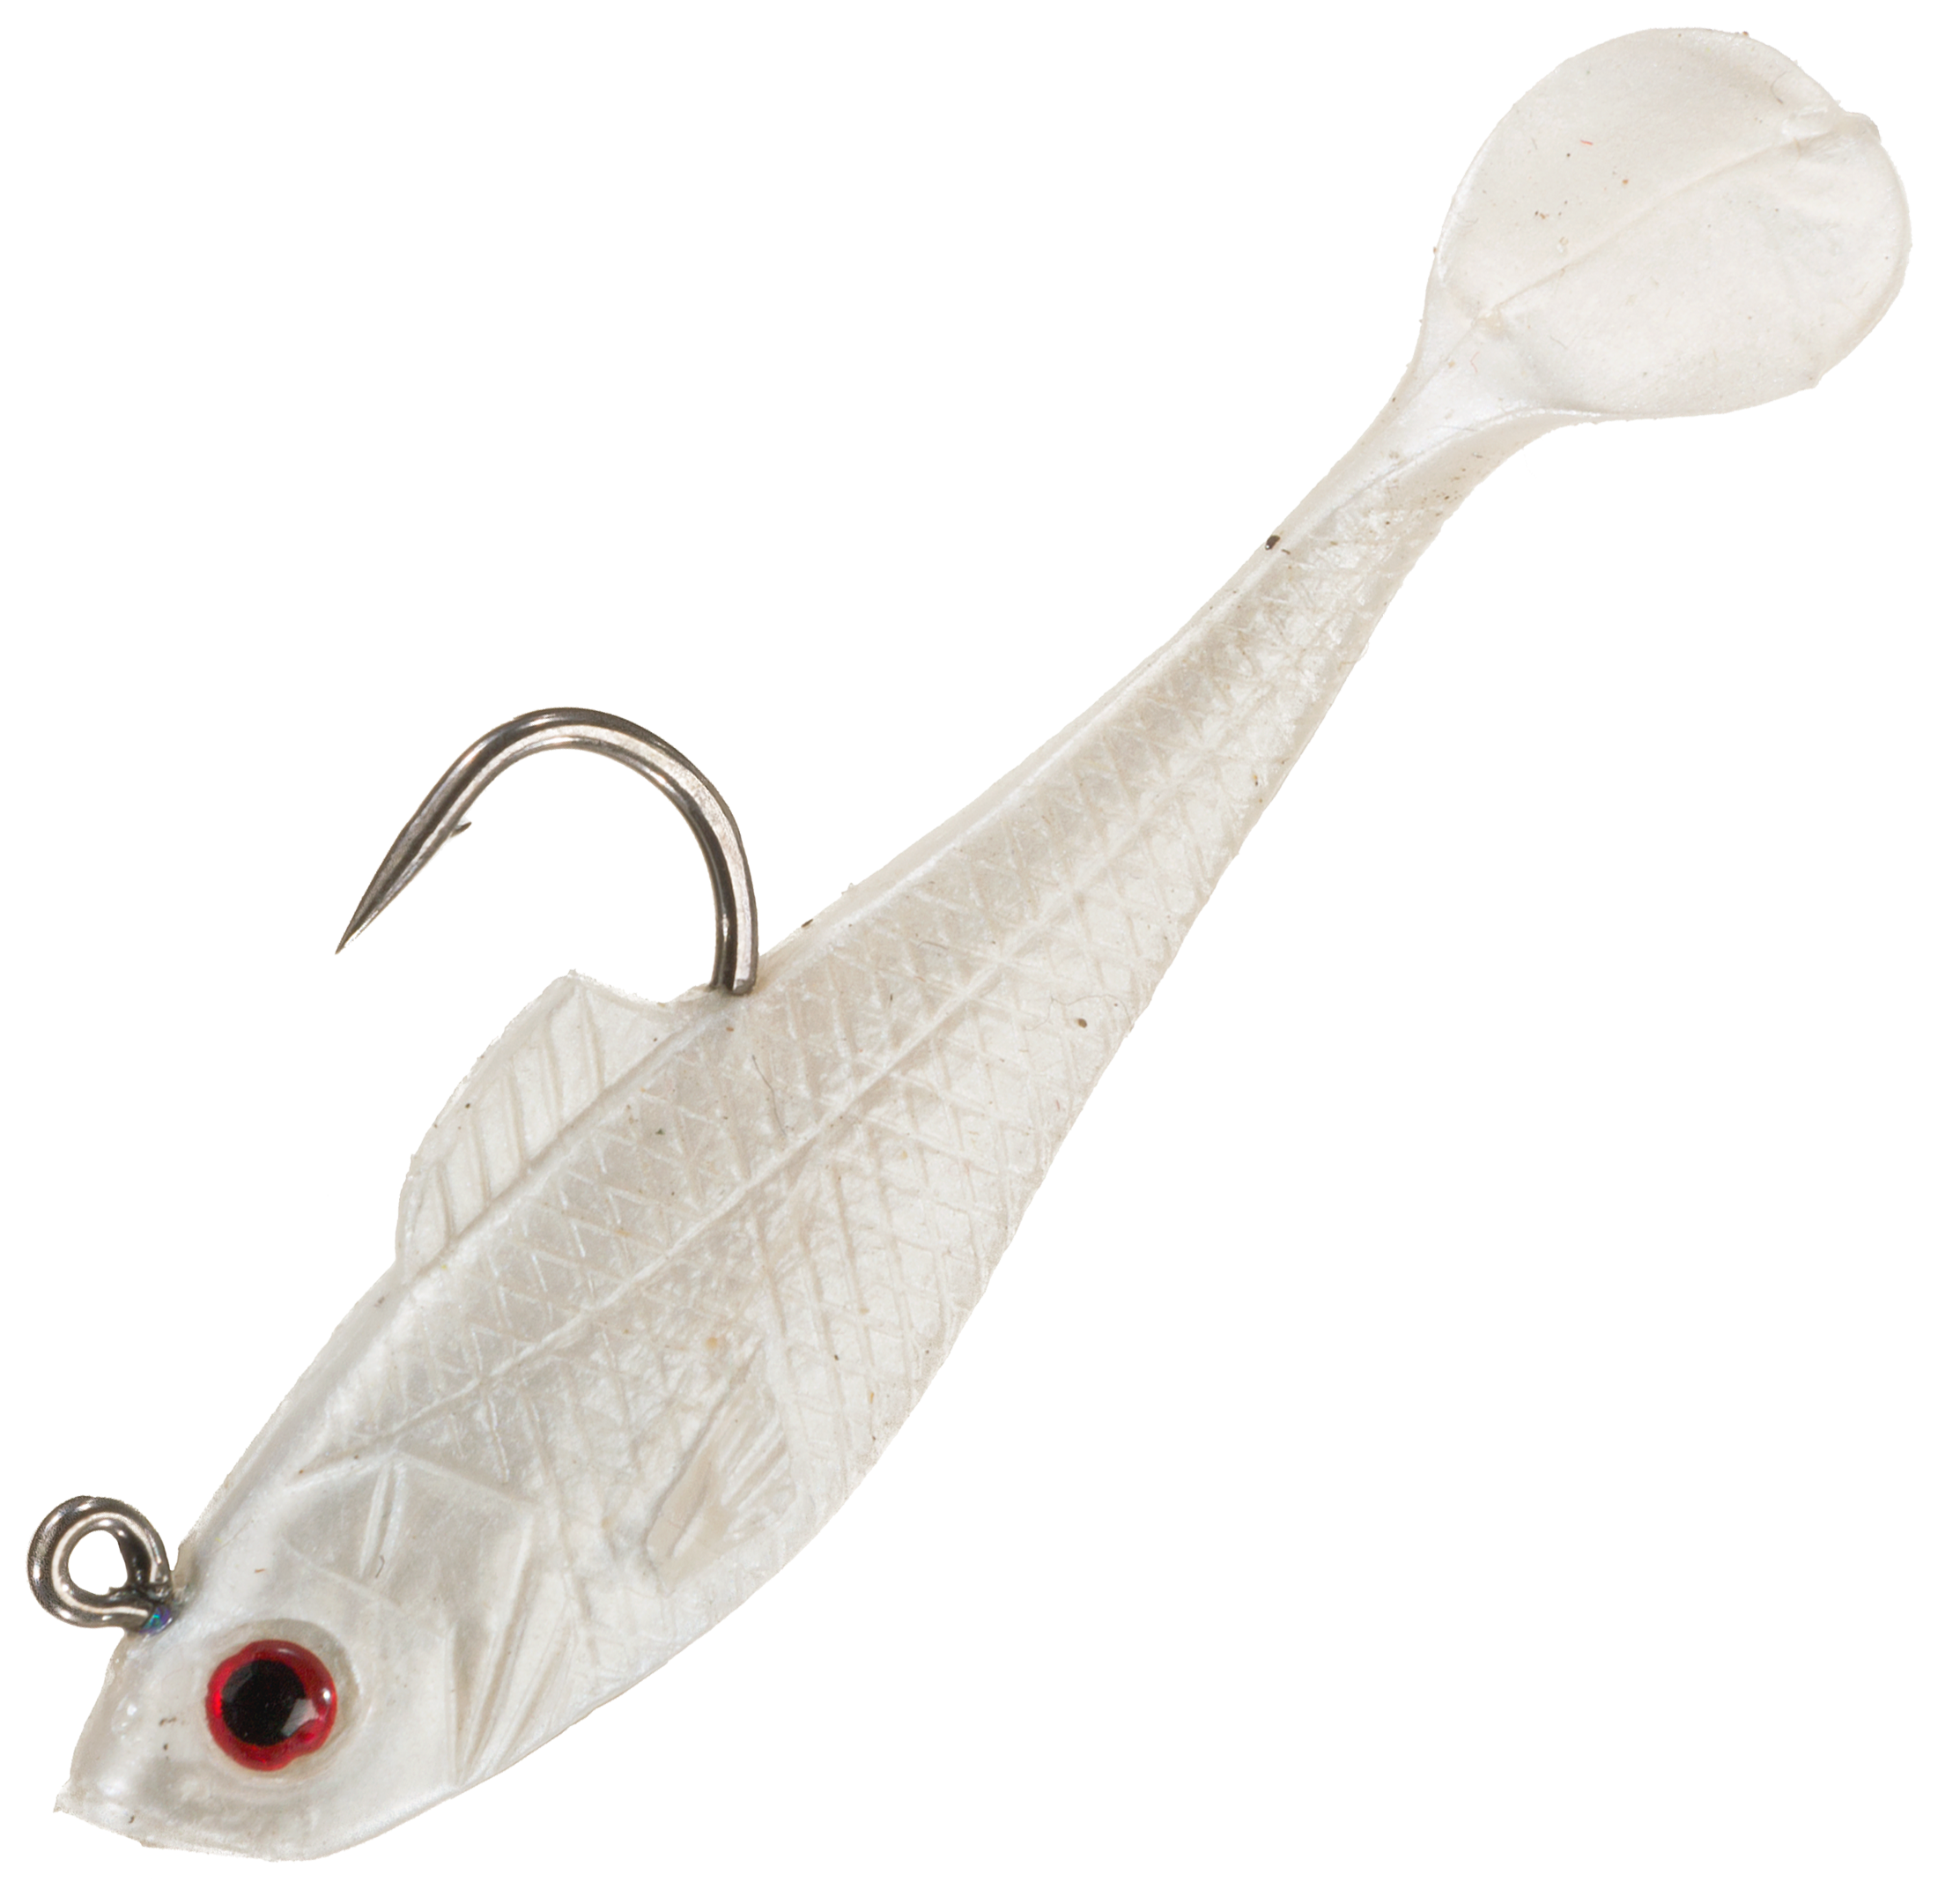 Bass Pro Shops Boss Shad - 4″ - Pearl Red Eye